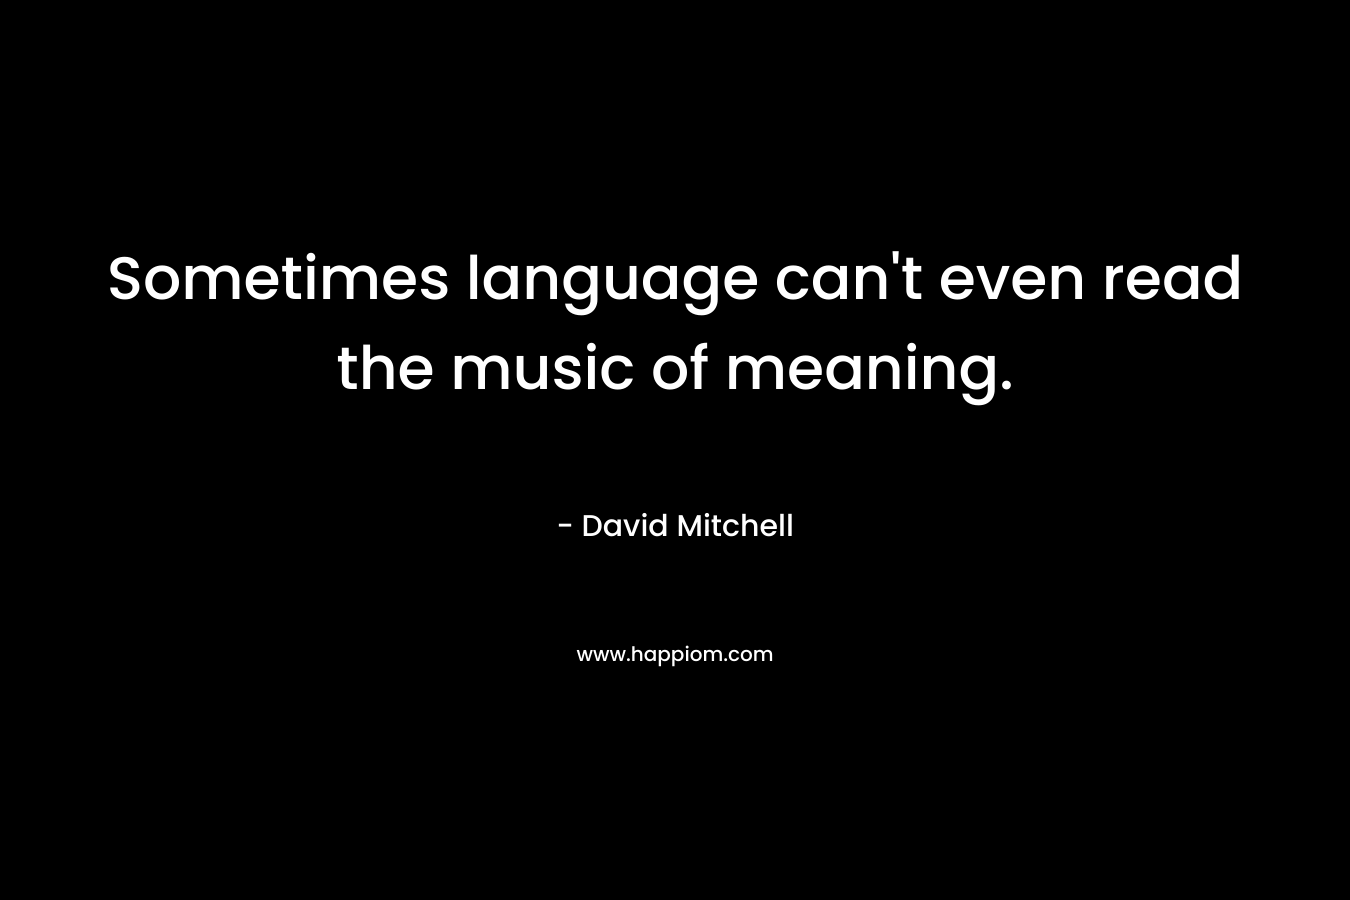 Sometimes language can't even read the music of meaning.